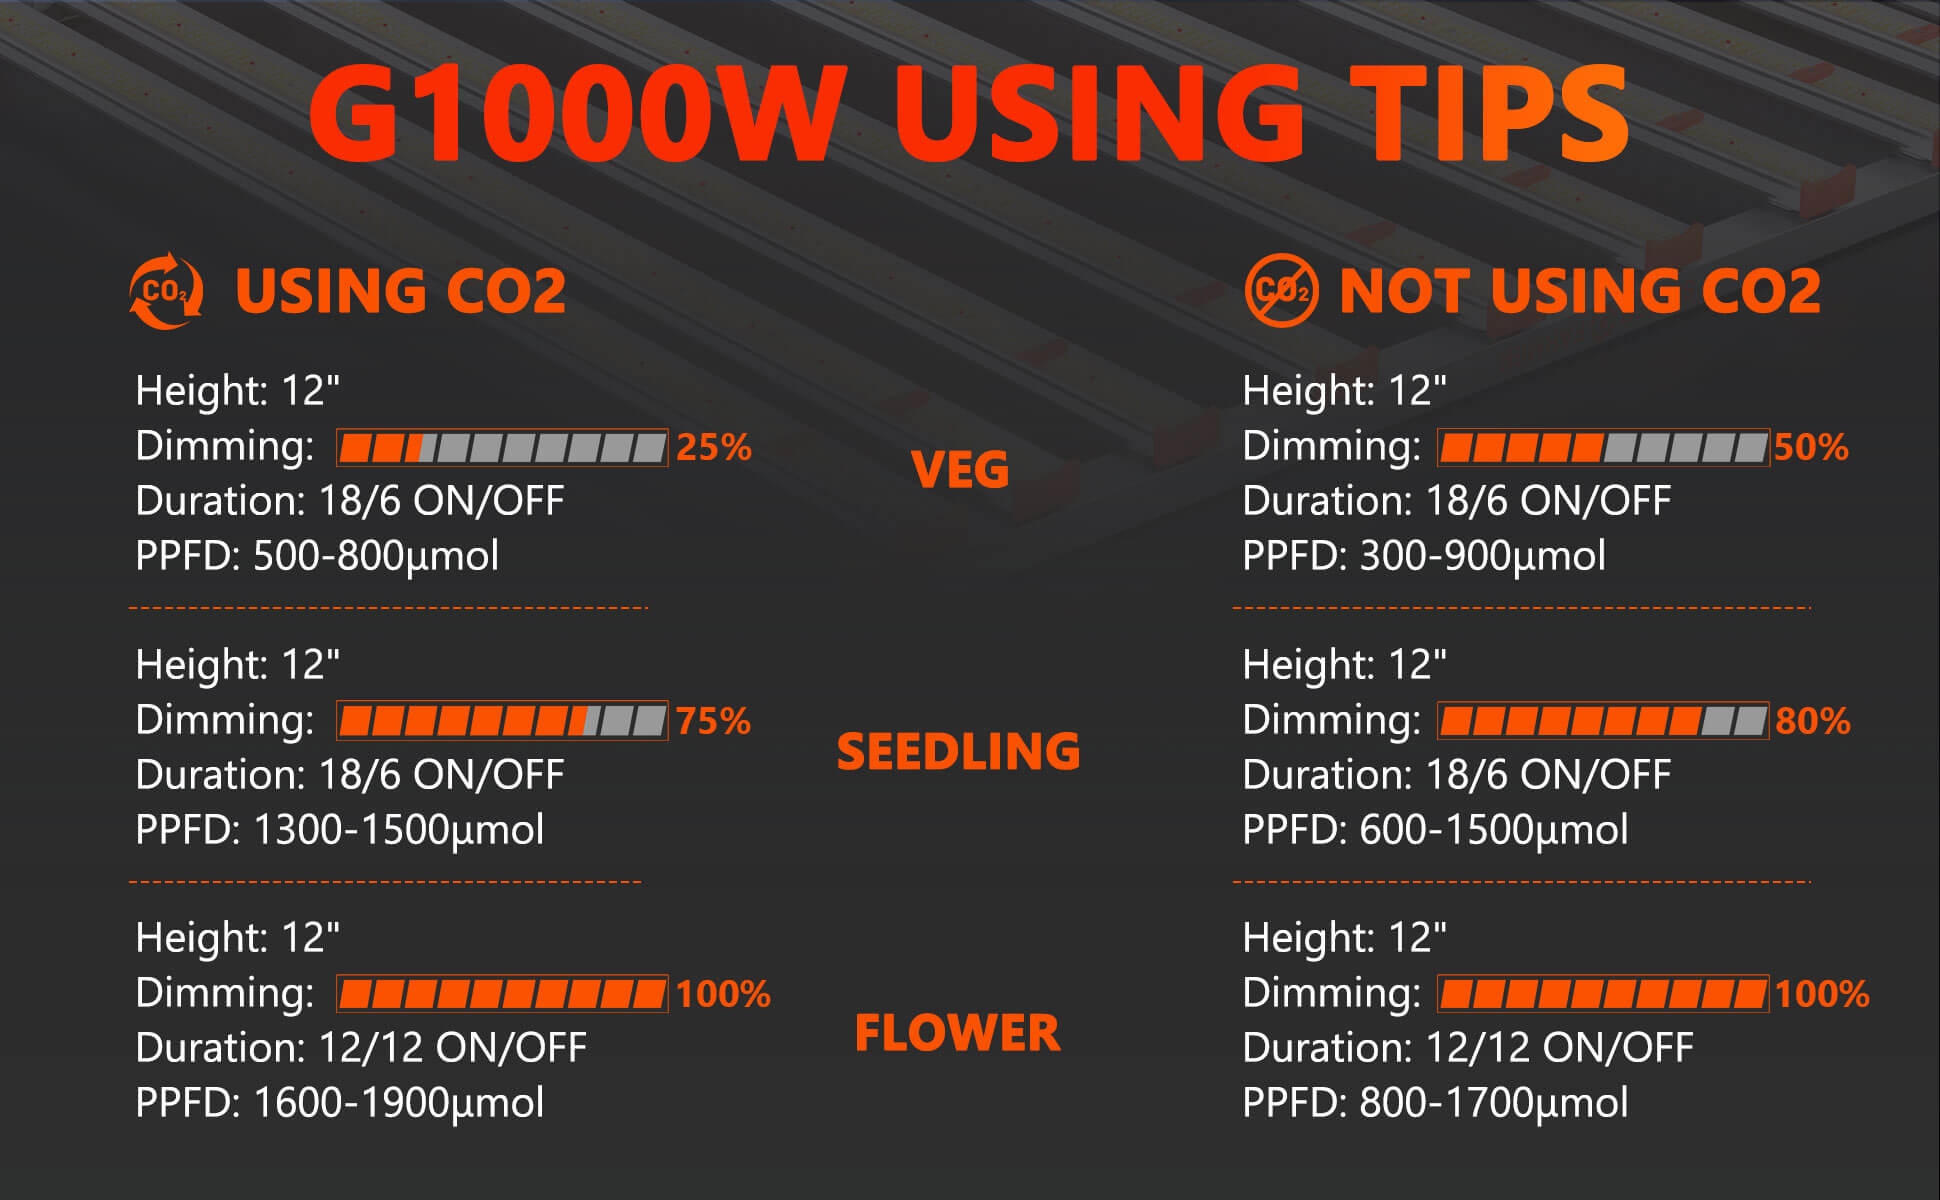 G1000W-Using tips with CO2